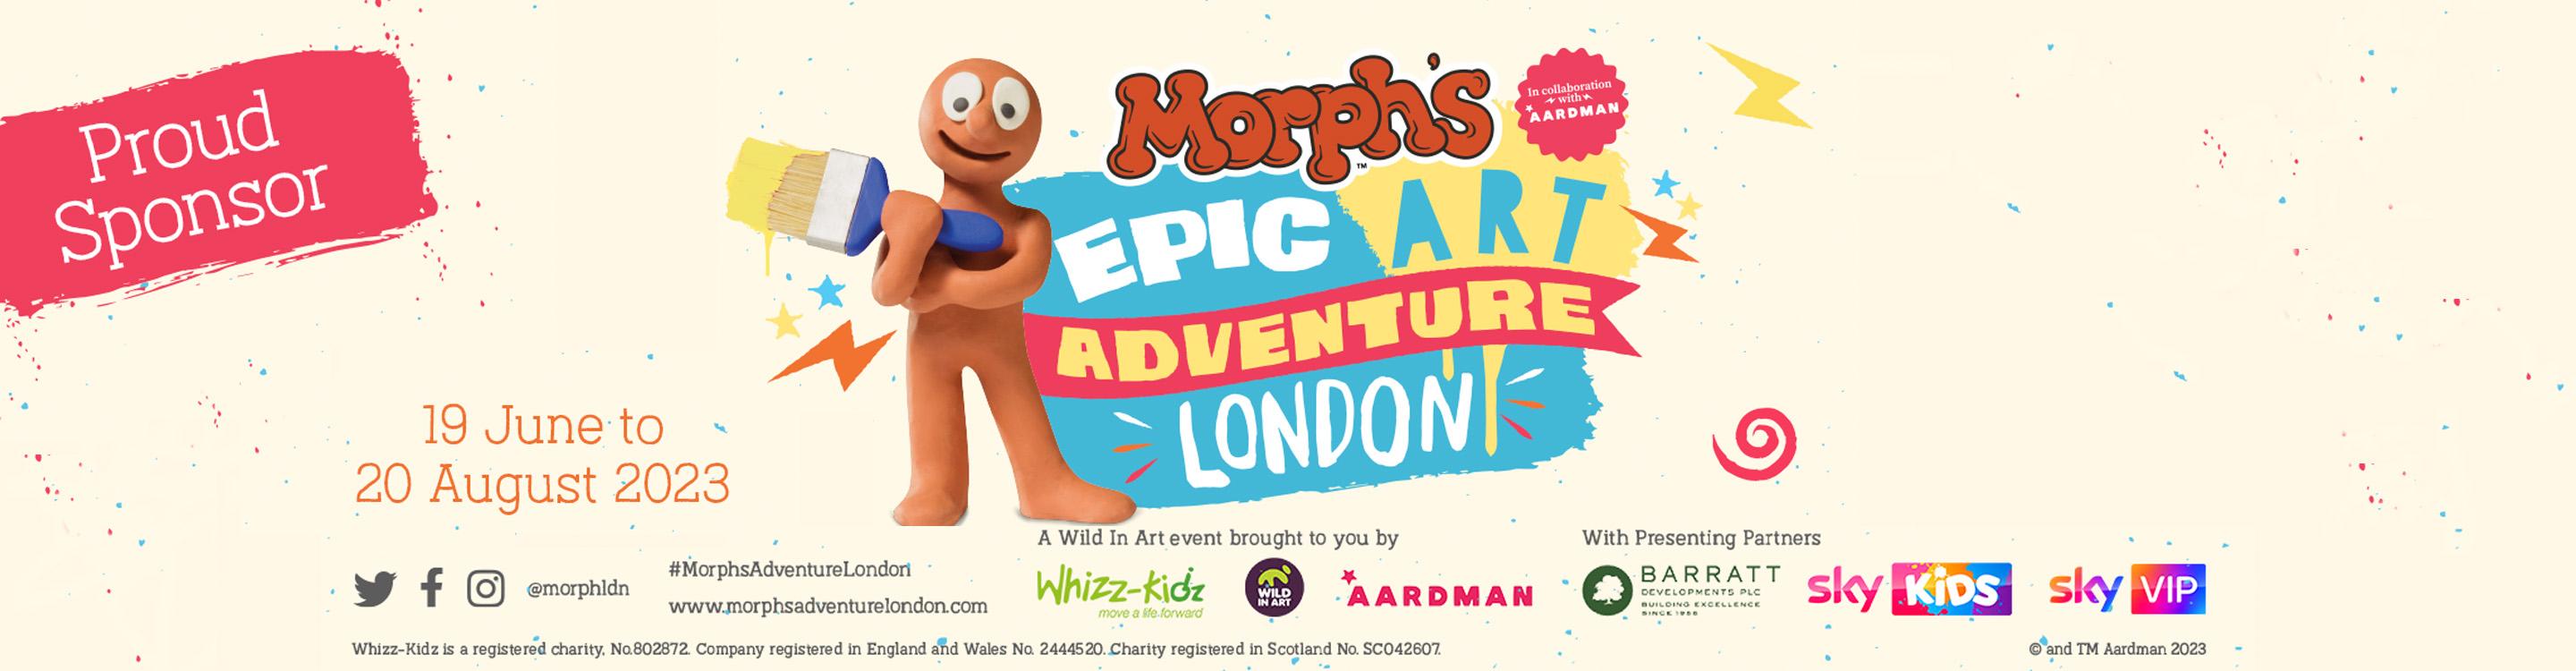 Morph's Epic Art Adventure is coming to London from 19 June to 20 August 2023